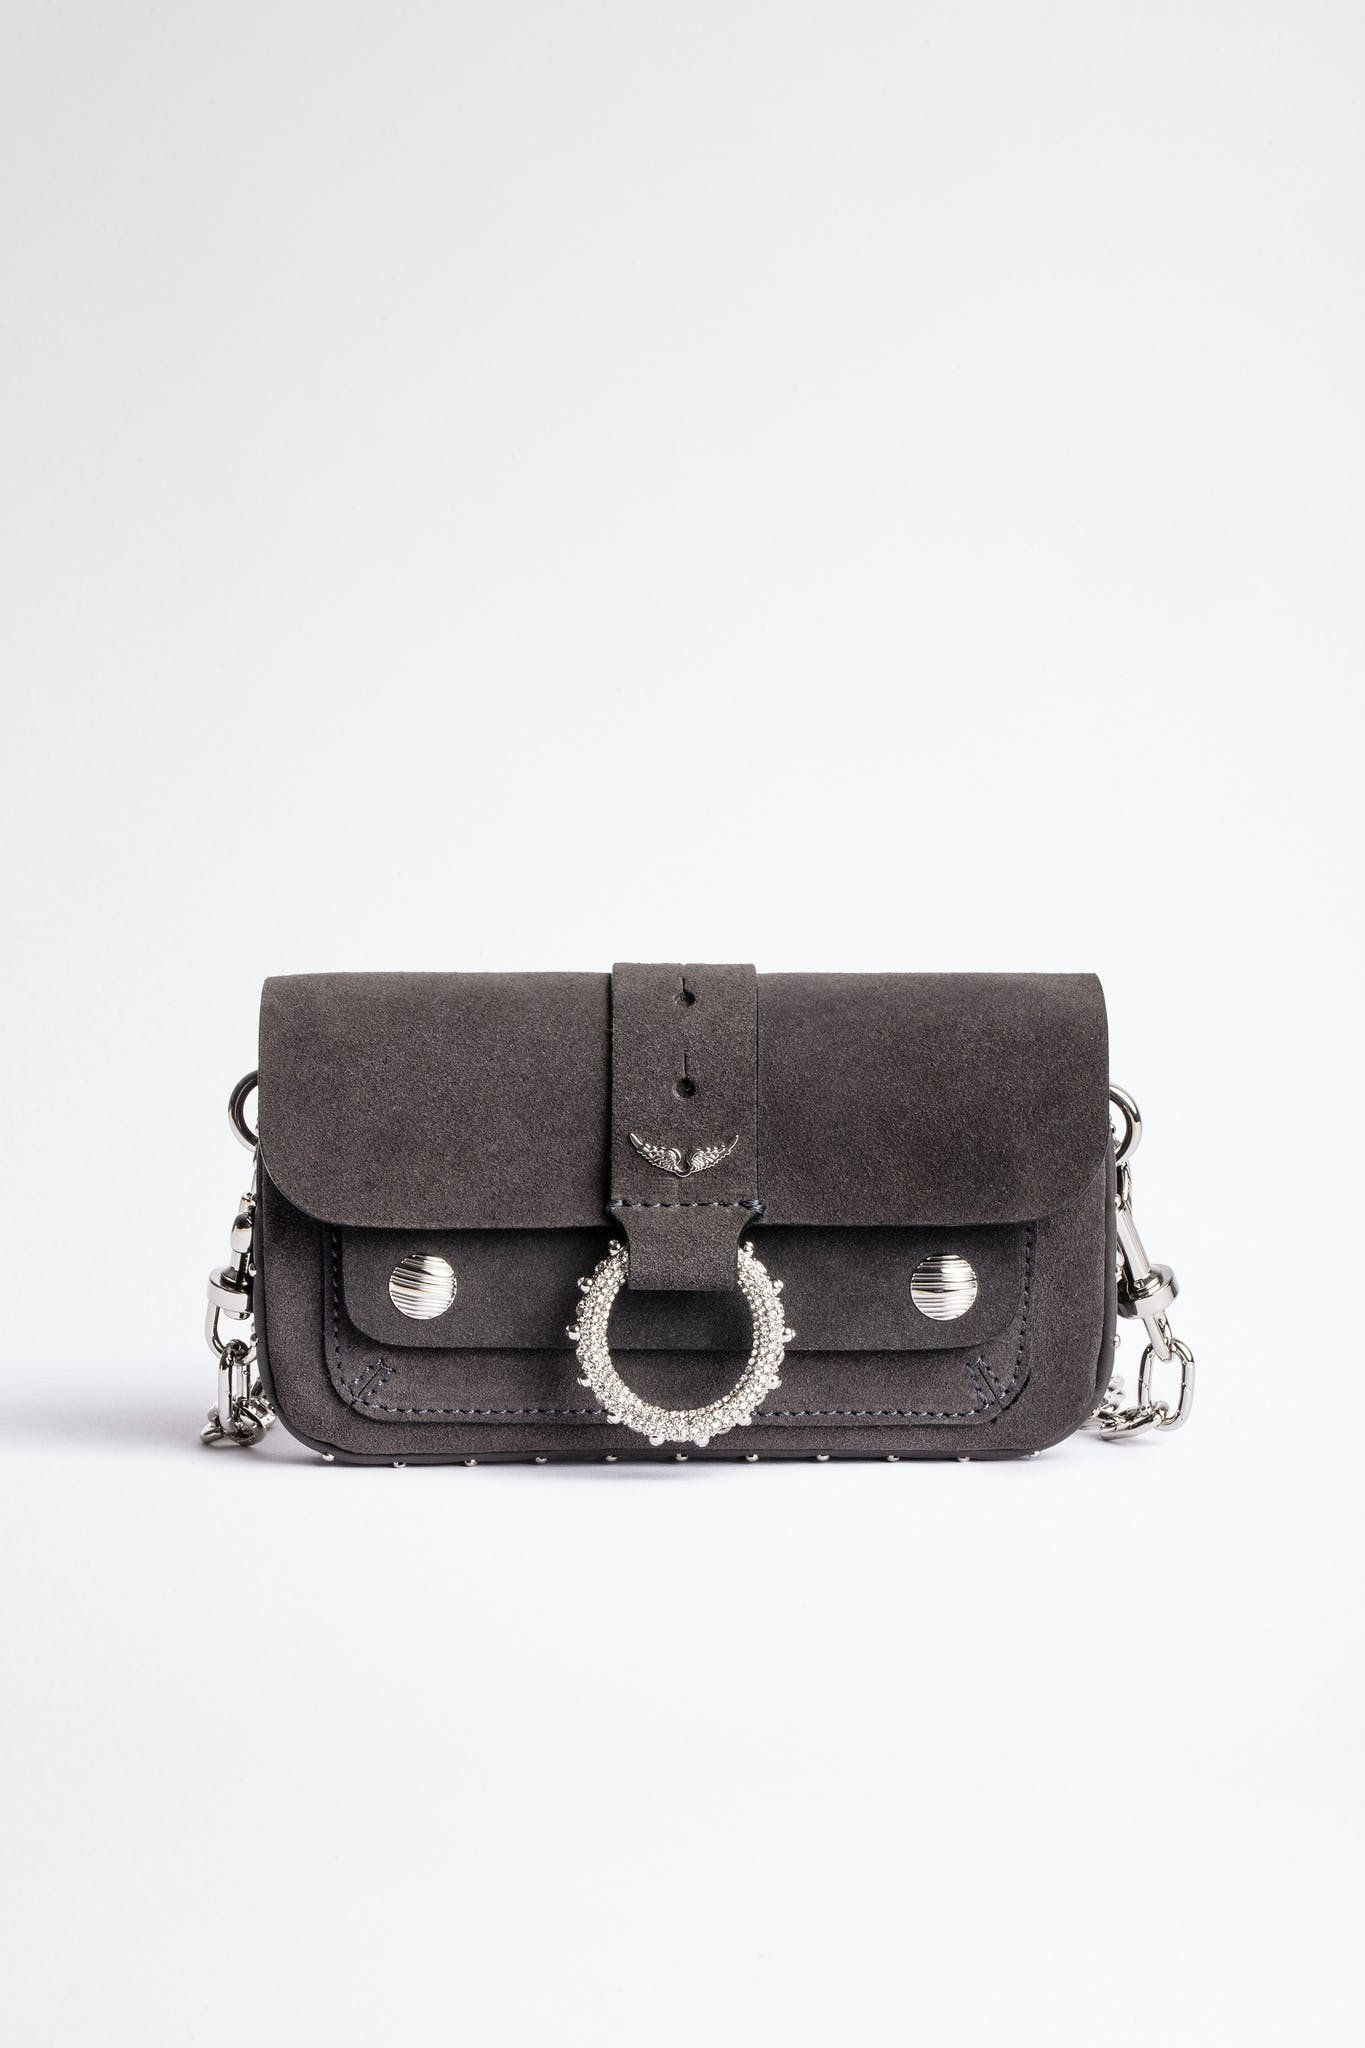 KATE MOSS x Zadig & Voltaire BAG COLLECTION